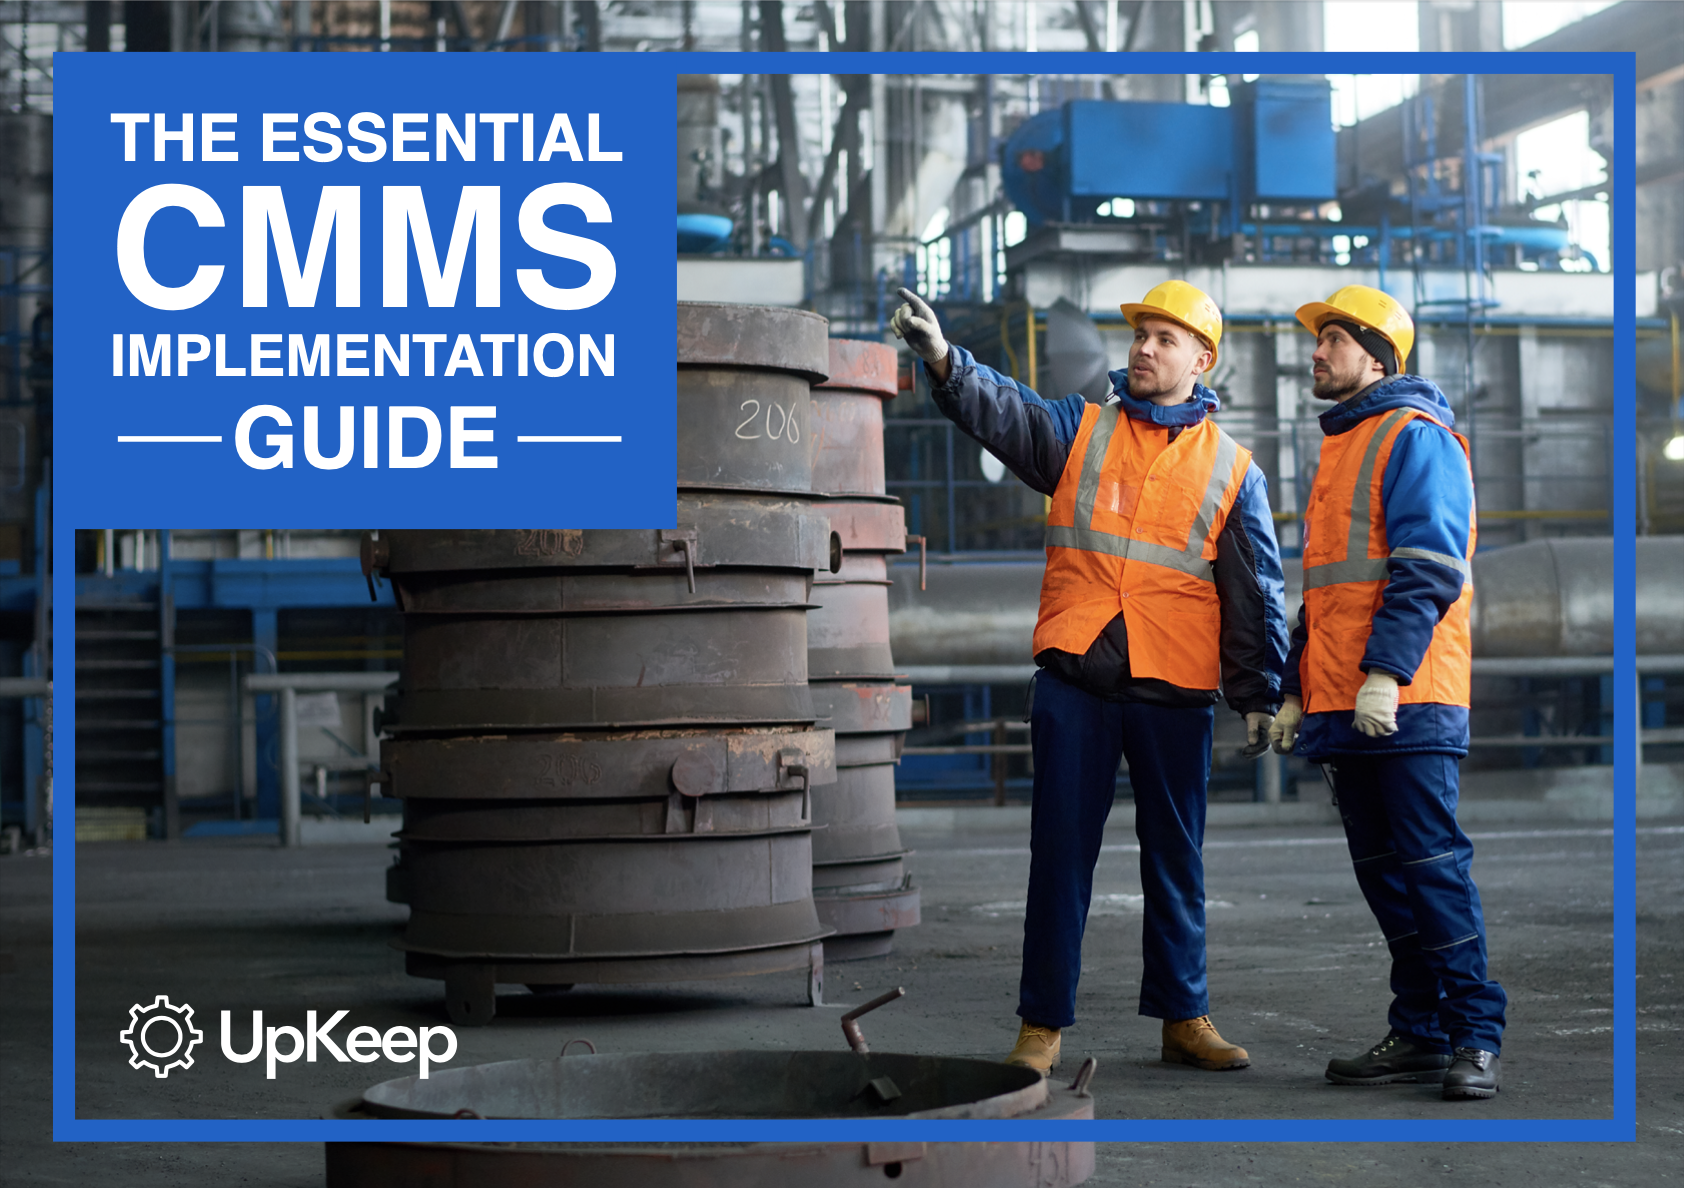 The Essential CMMS Implementation Guide